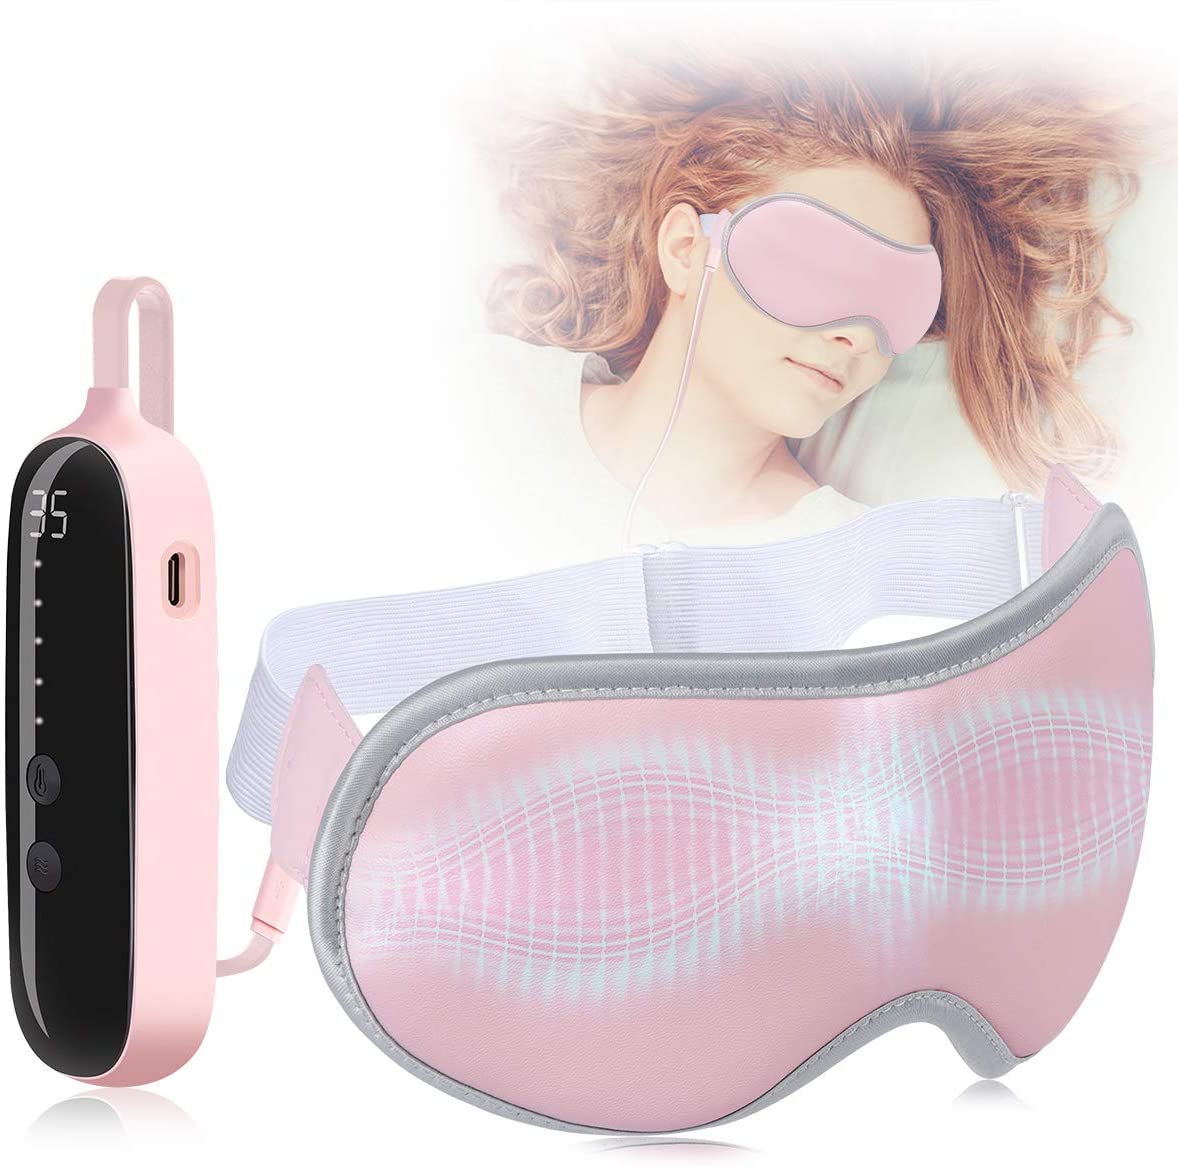 Review of OUVEROLA Heated Eye Massager with 5 Vibration Mode and Adjustable Temp